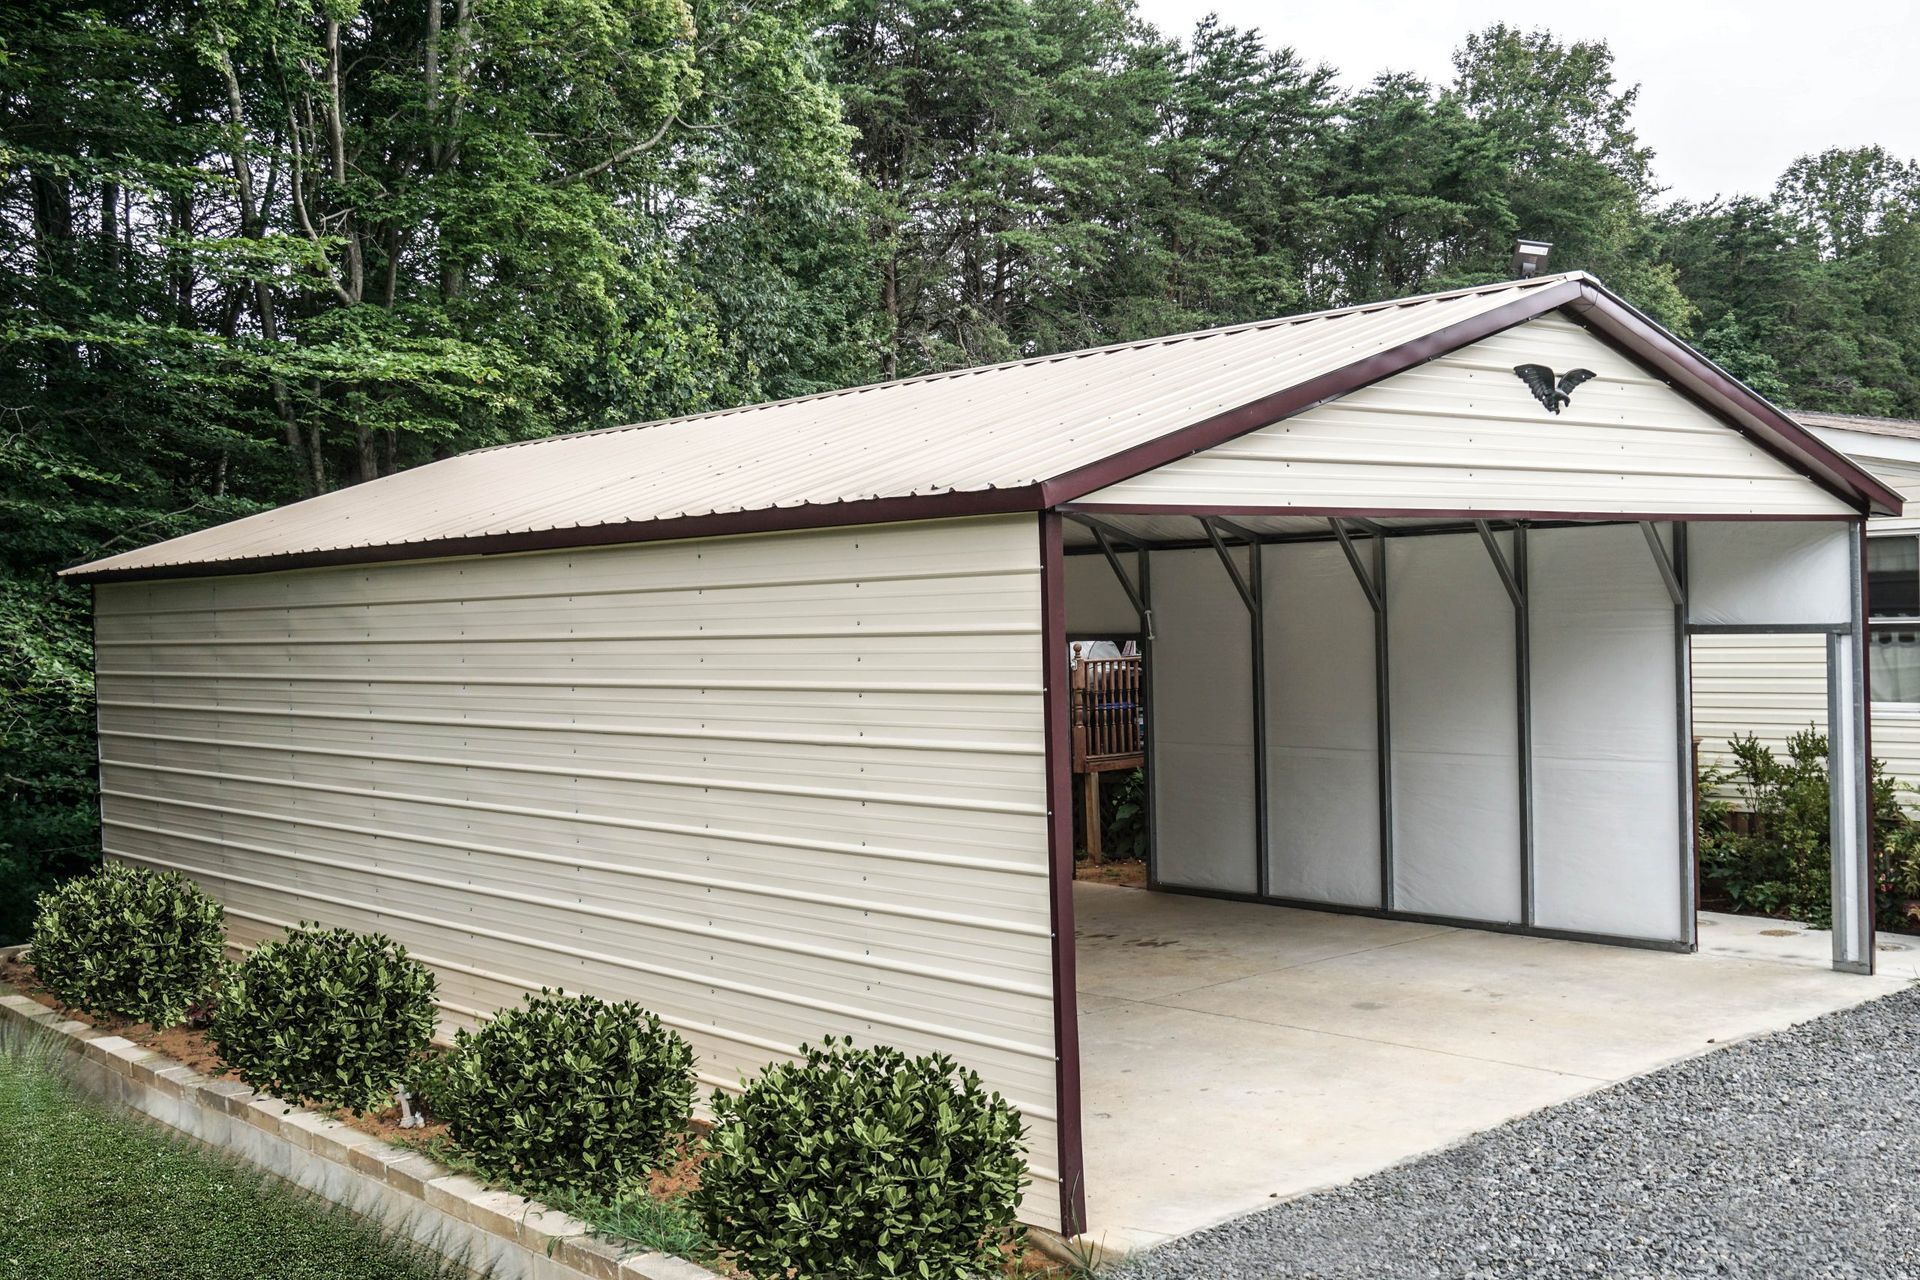 A white metal garage with a brown roof and a bird on the roof.